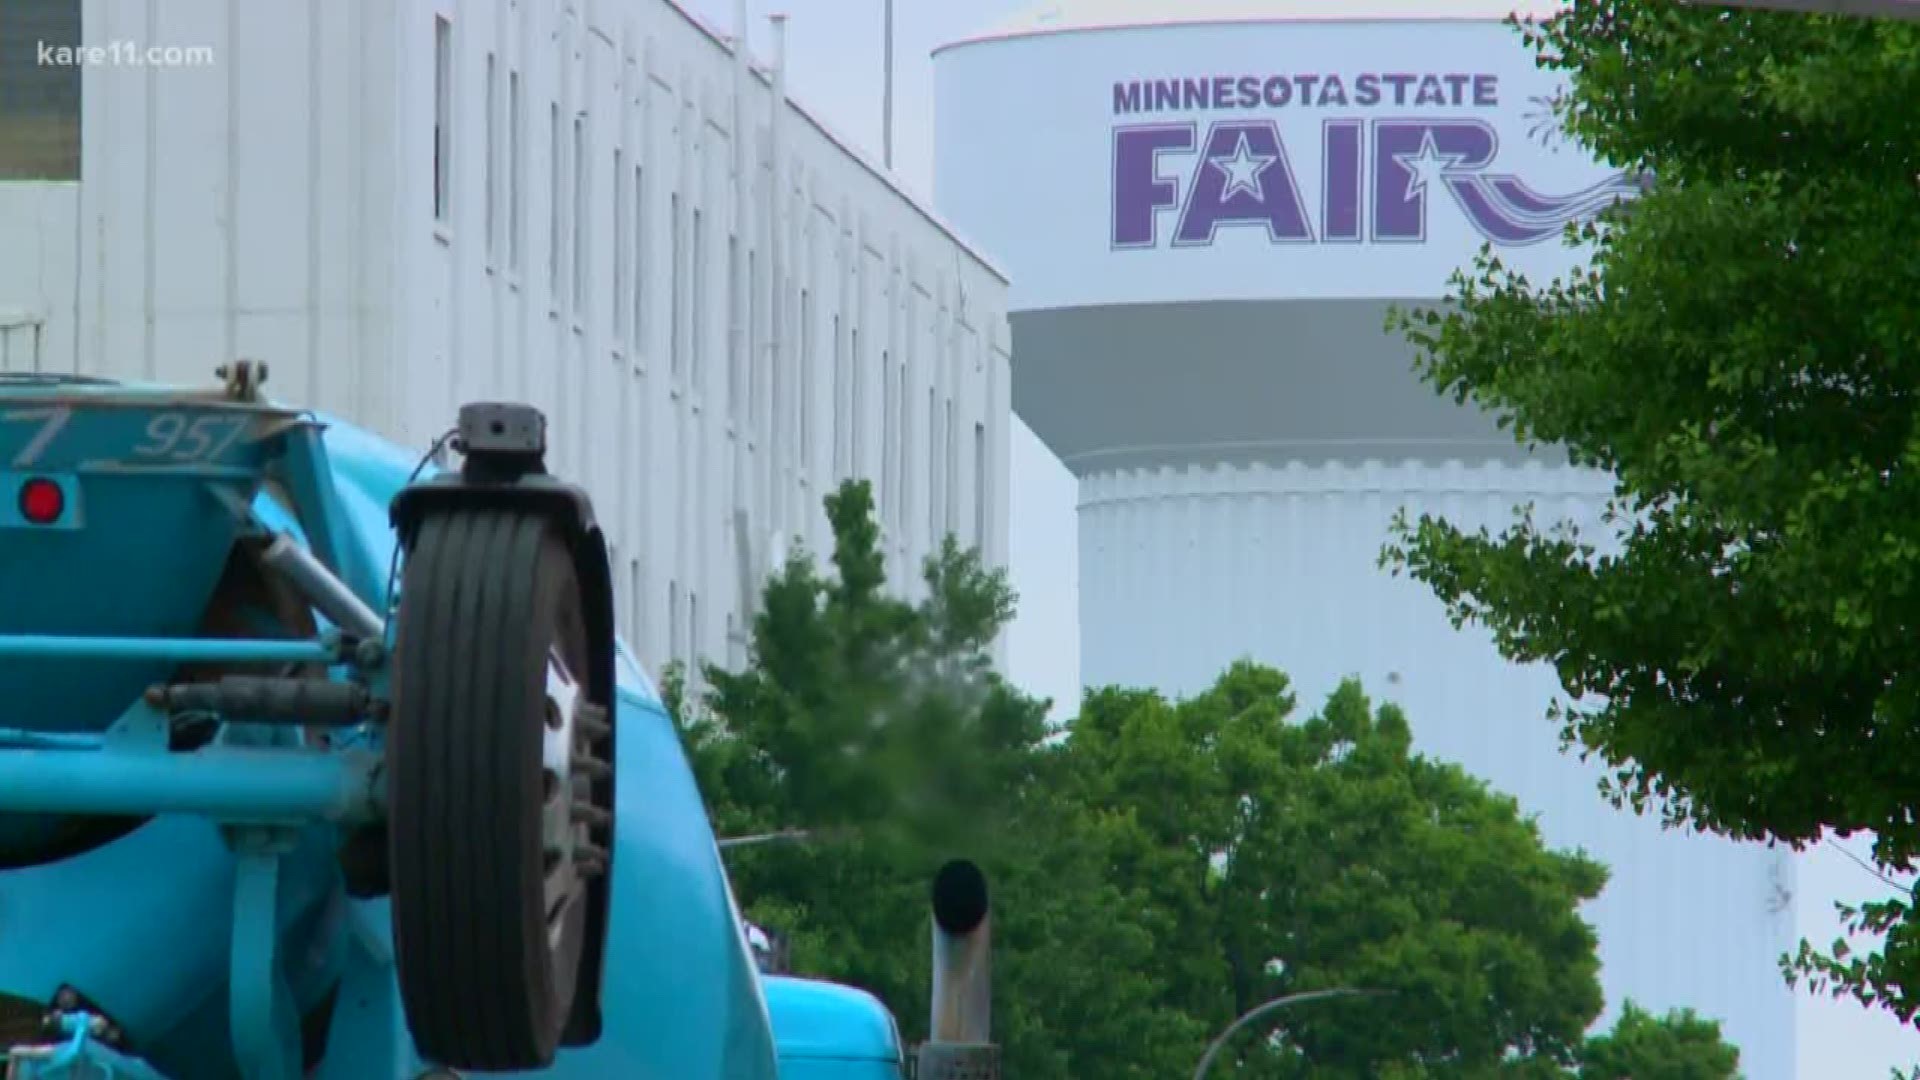 It's never too early to get a sneak peak at what's coming to the Minnesota State Fair!